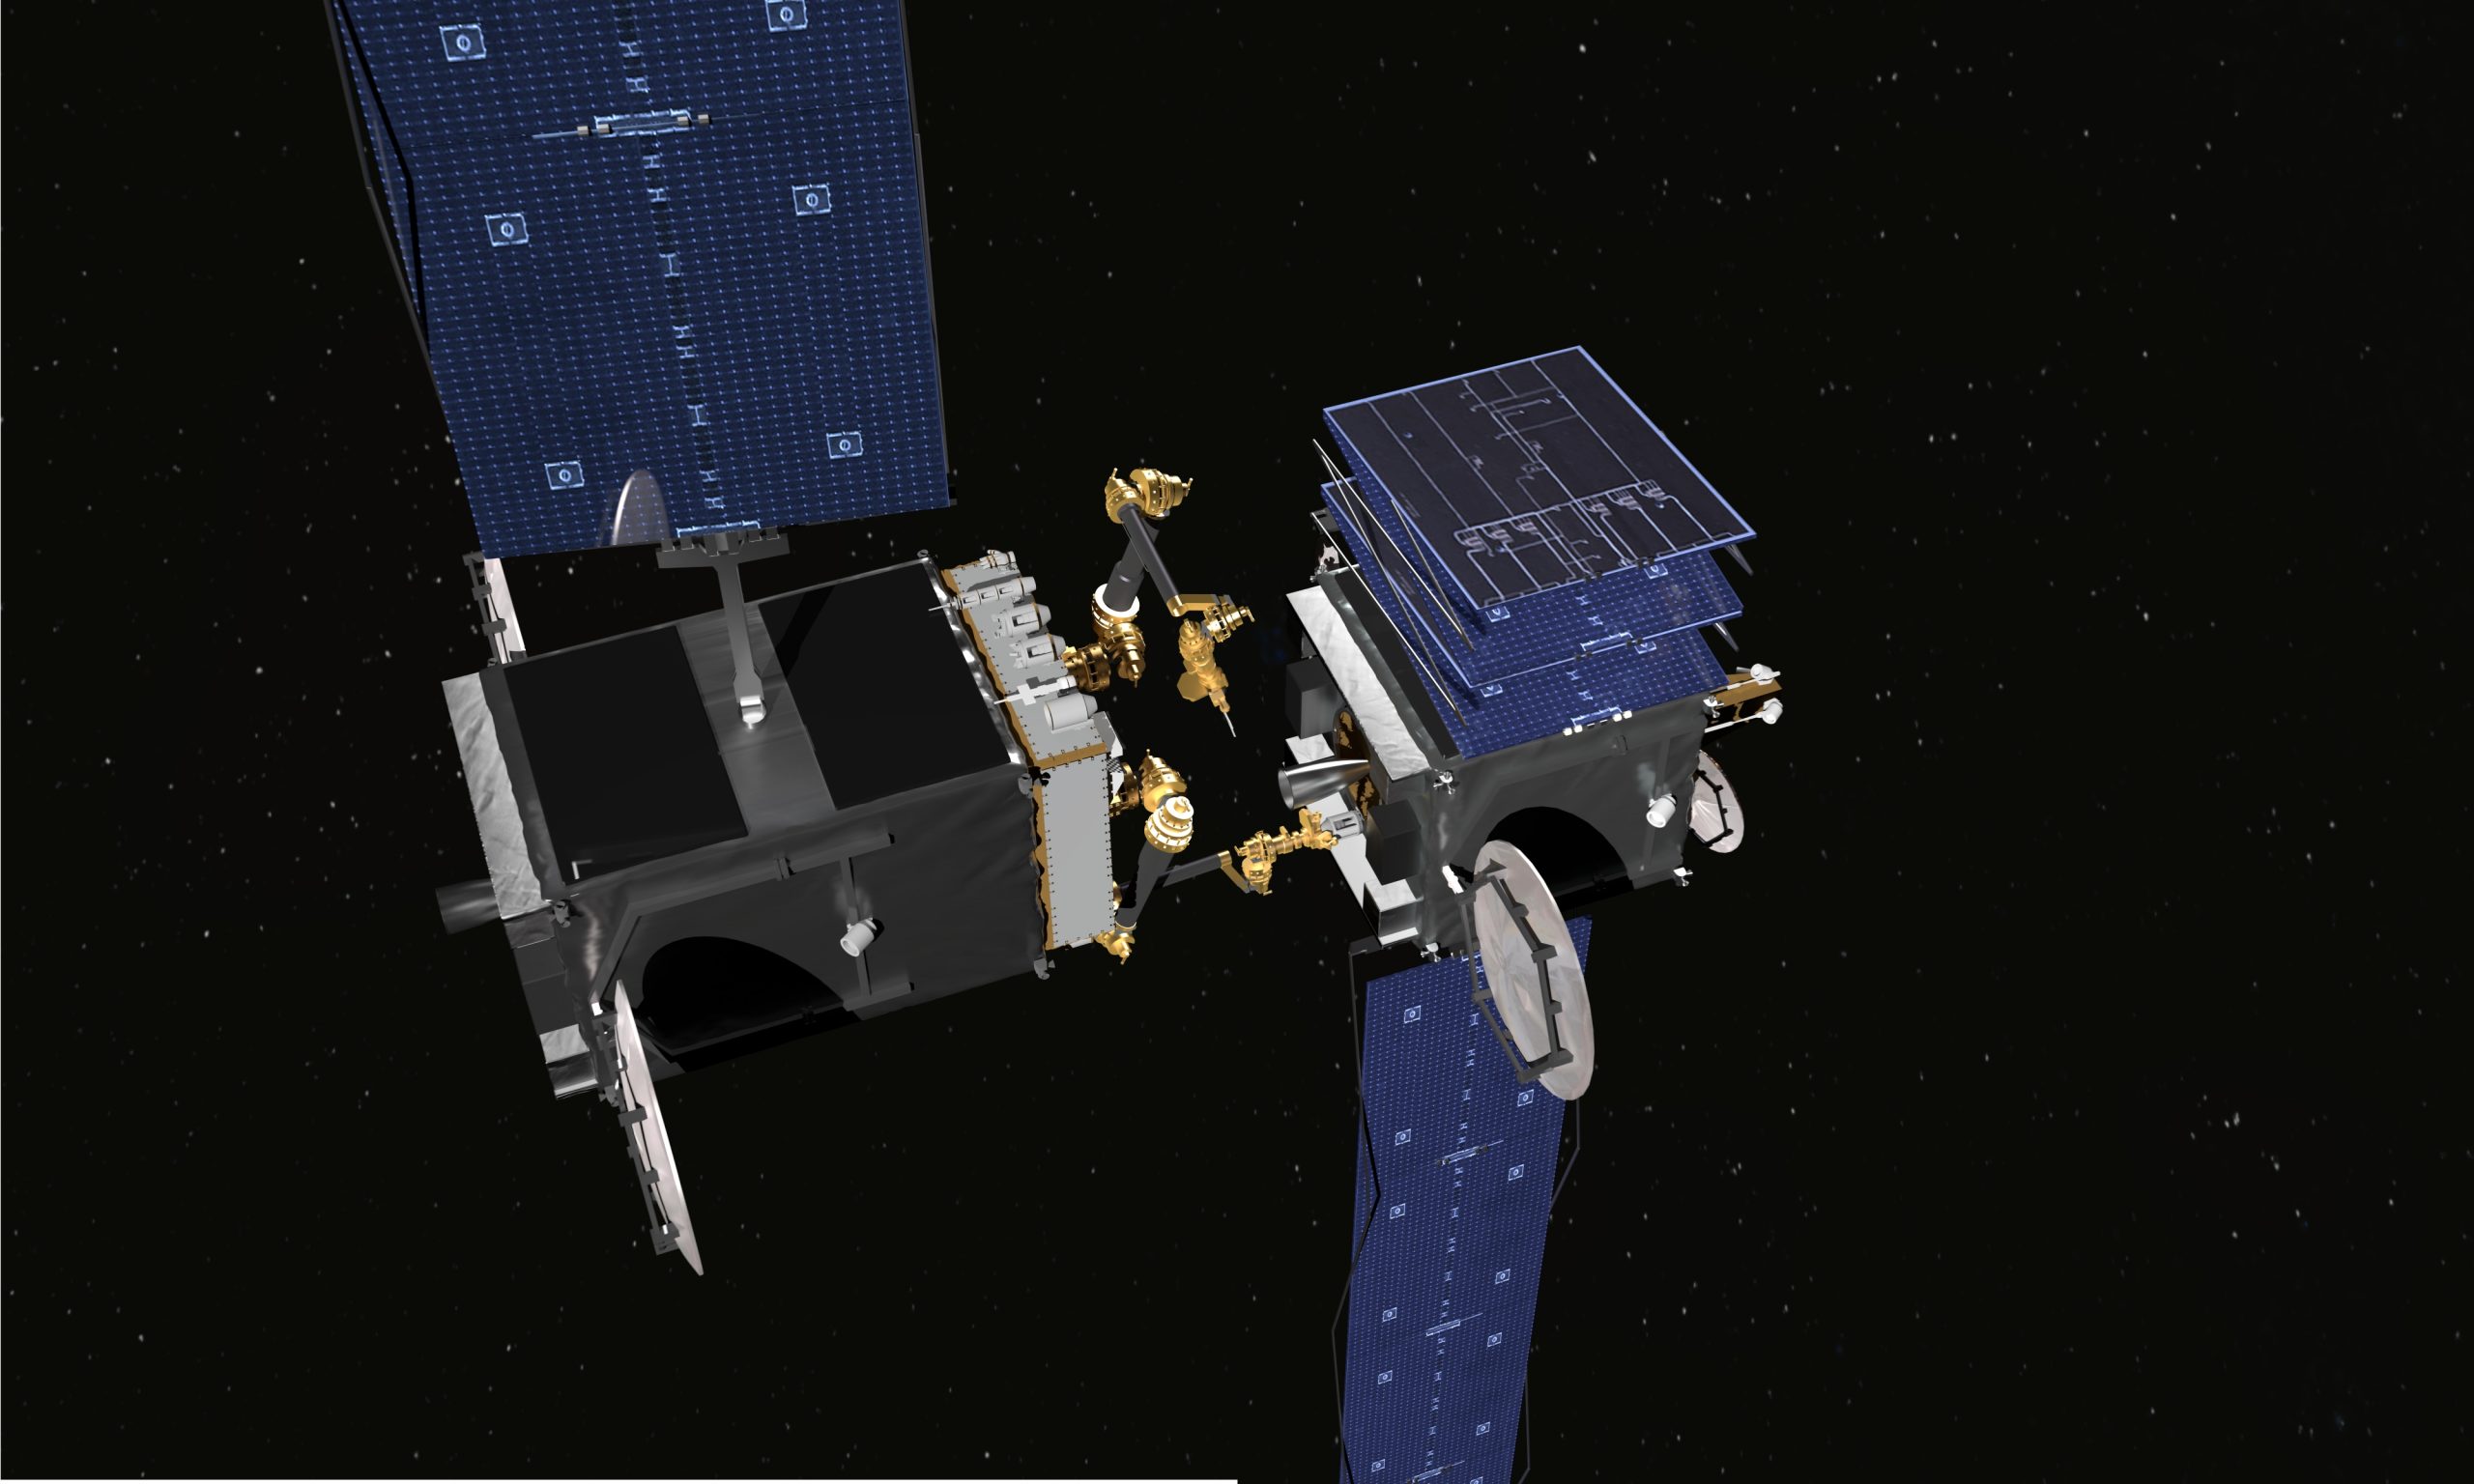 SSL selected to partner with Darpa to develop satellite servicing business